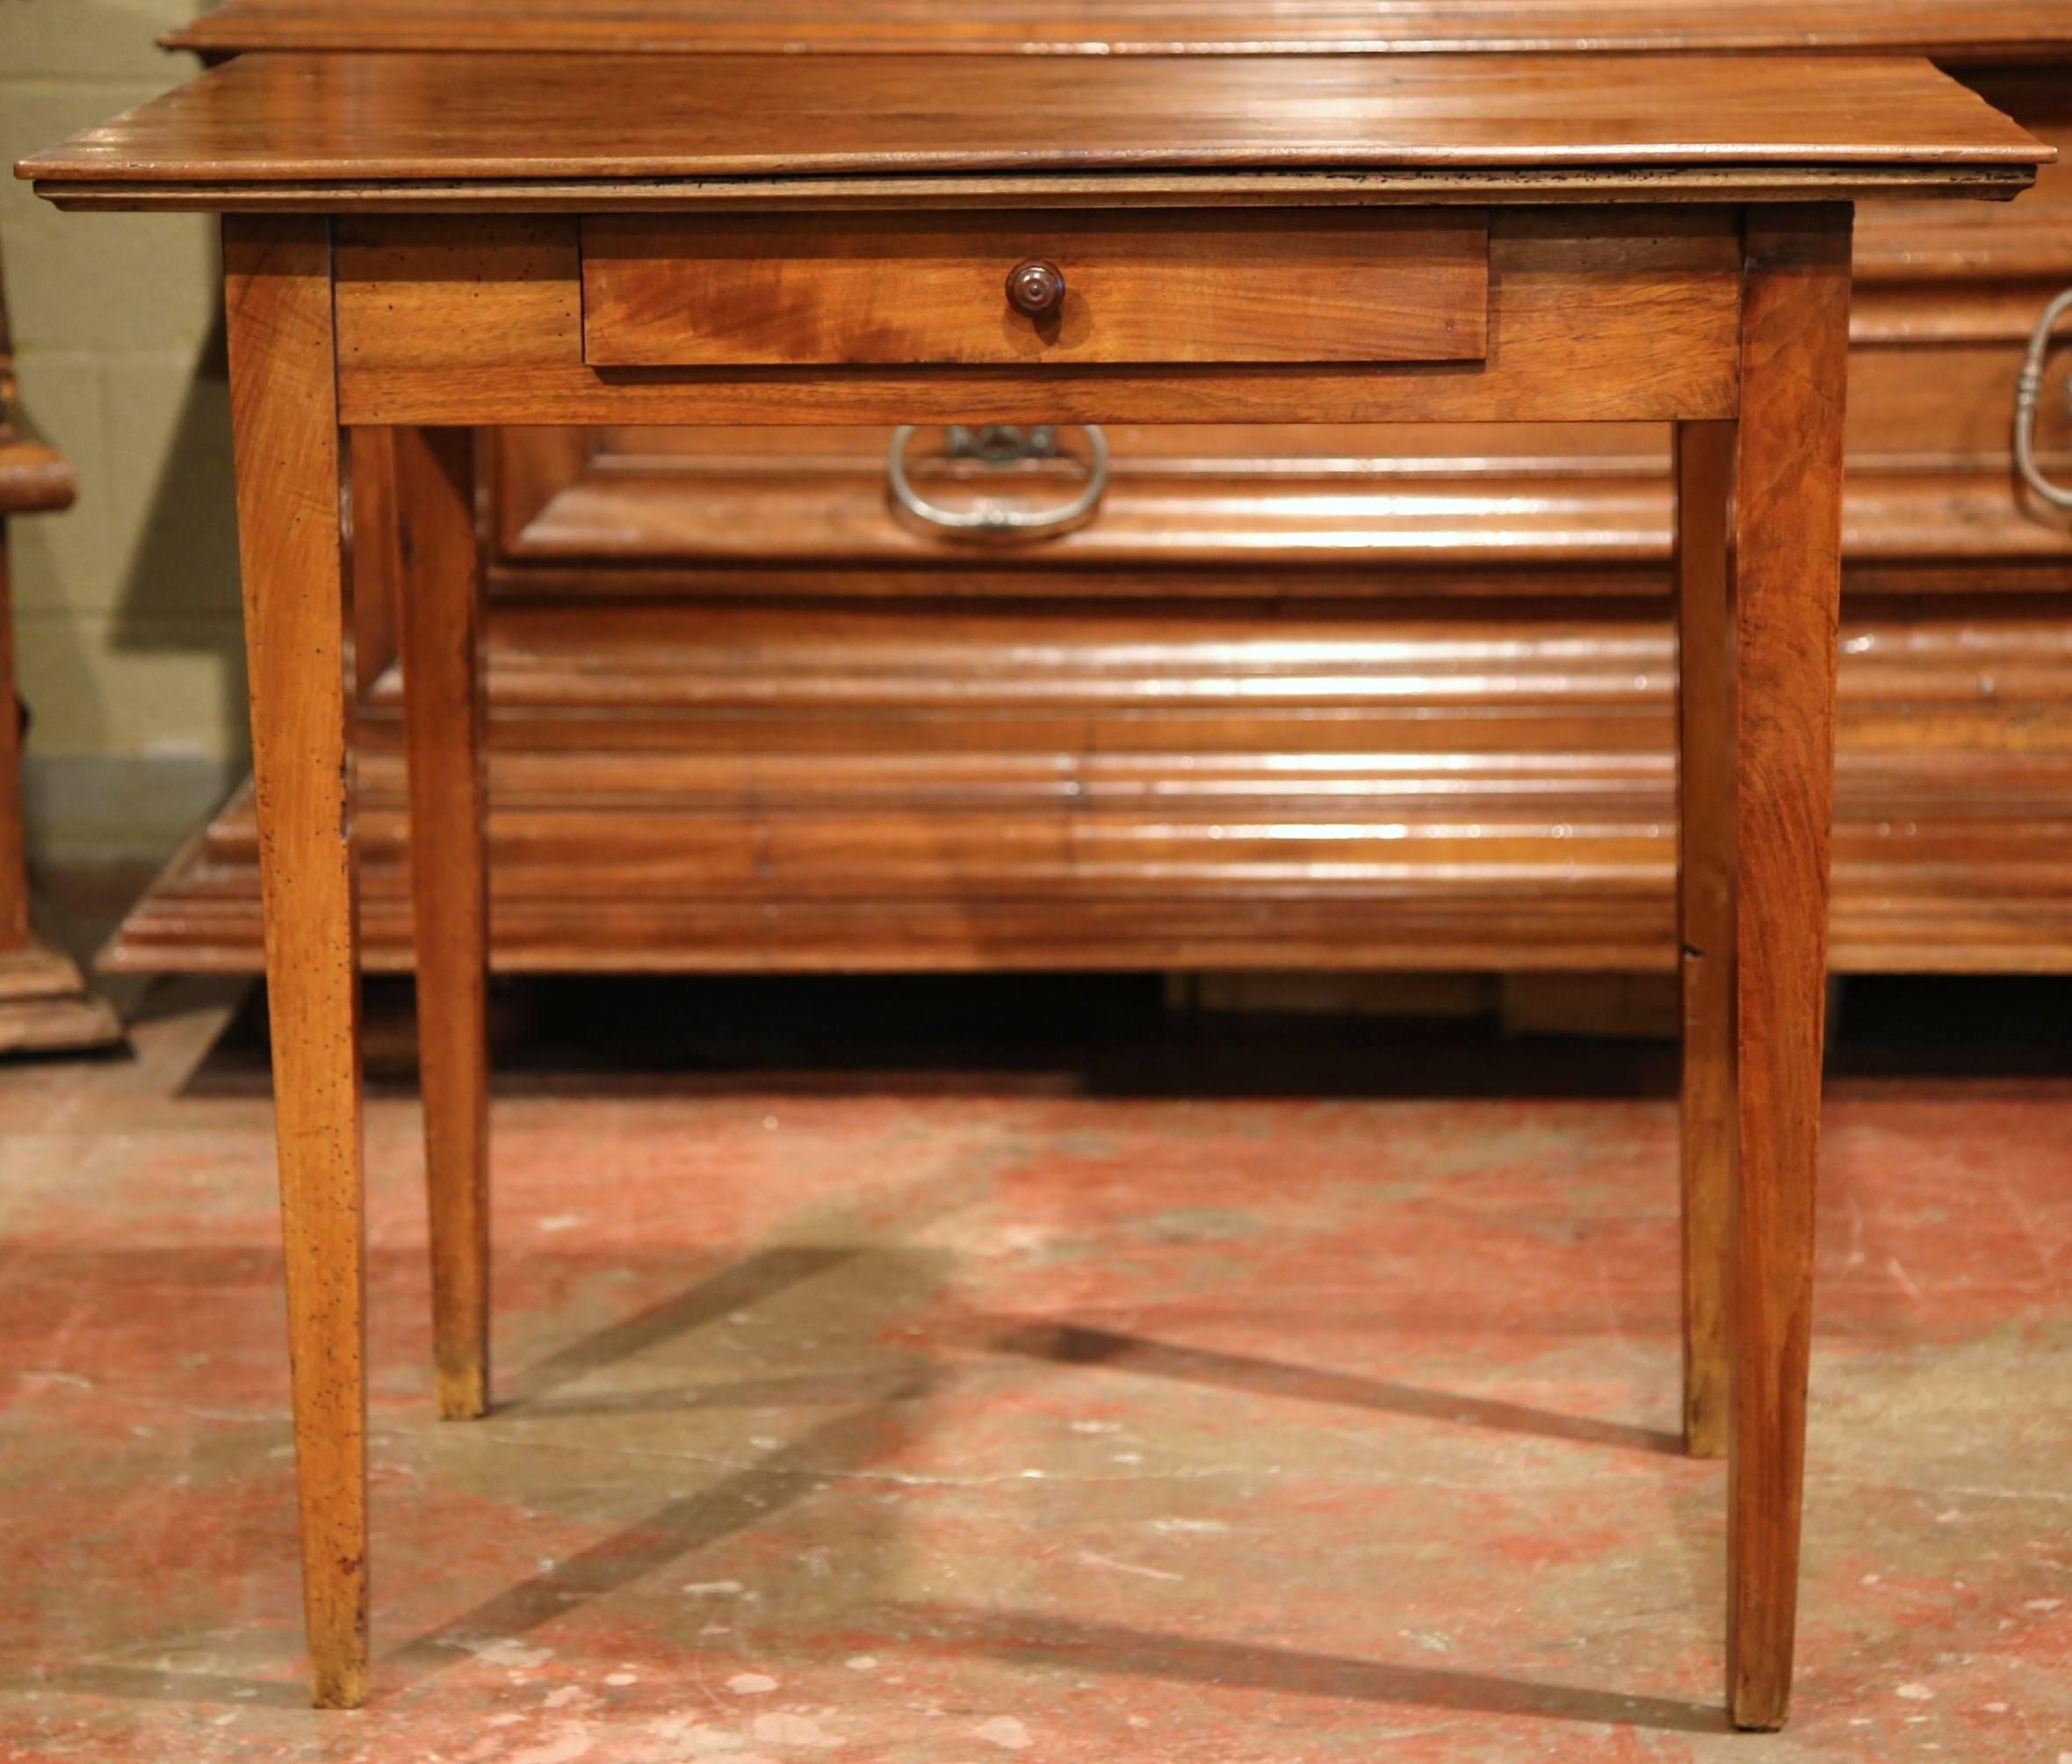 This versatile, antique fruitwood end table was carved in the Poitou region of France, circa 1880. The small desk has a drawer across the front with four slim, tapered legs. This piece can be used as a desk or as a side table next to a bed. The